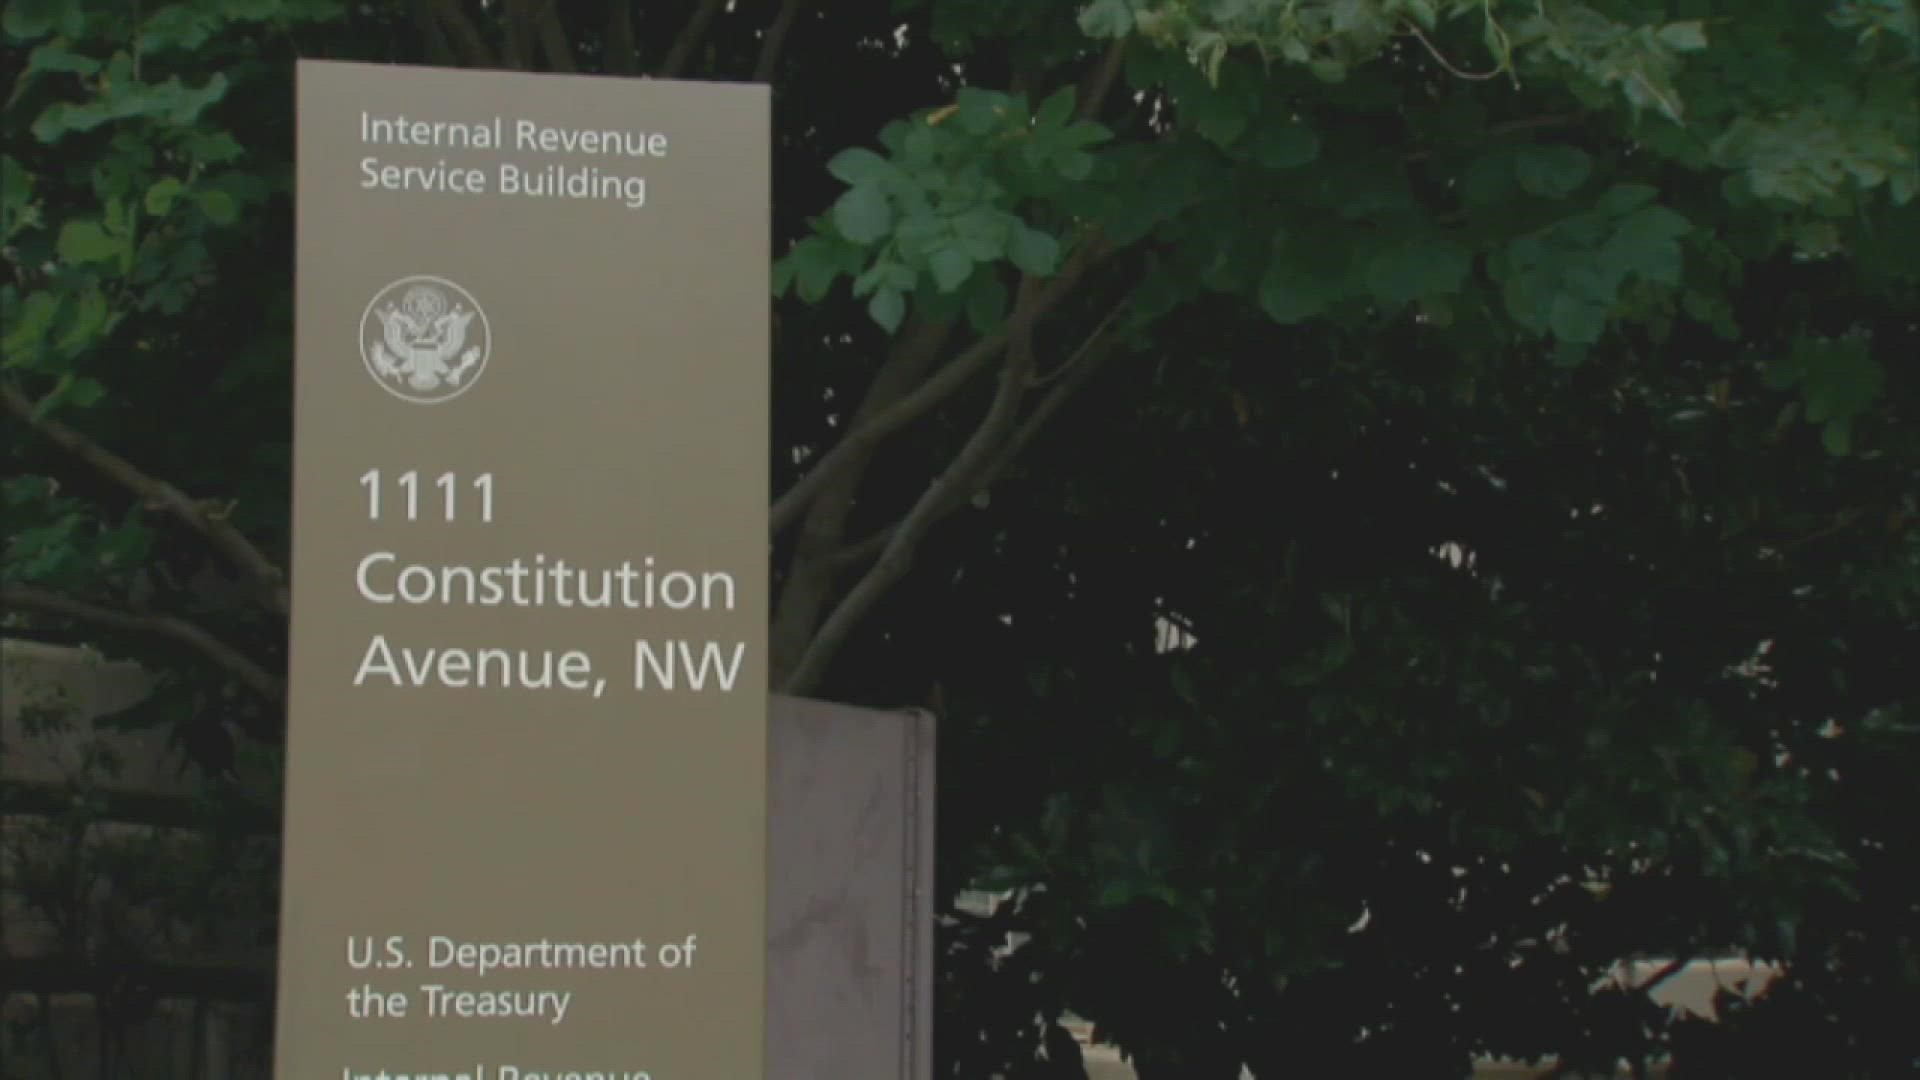 The IRS said it will not start processing tax returns until Monday.